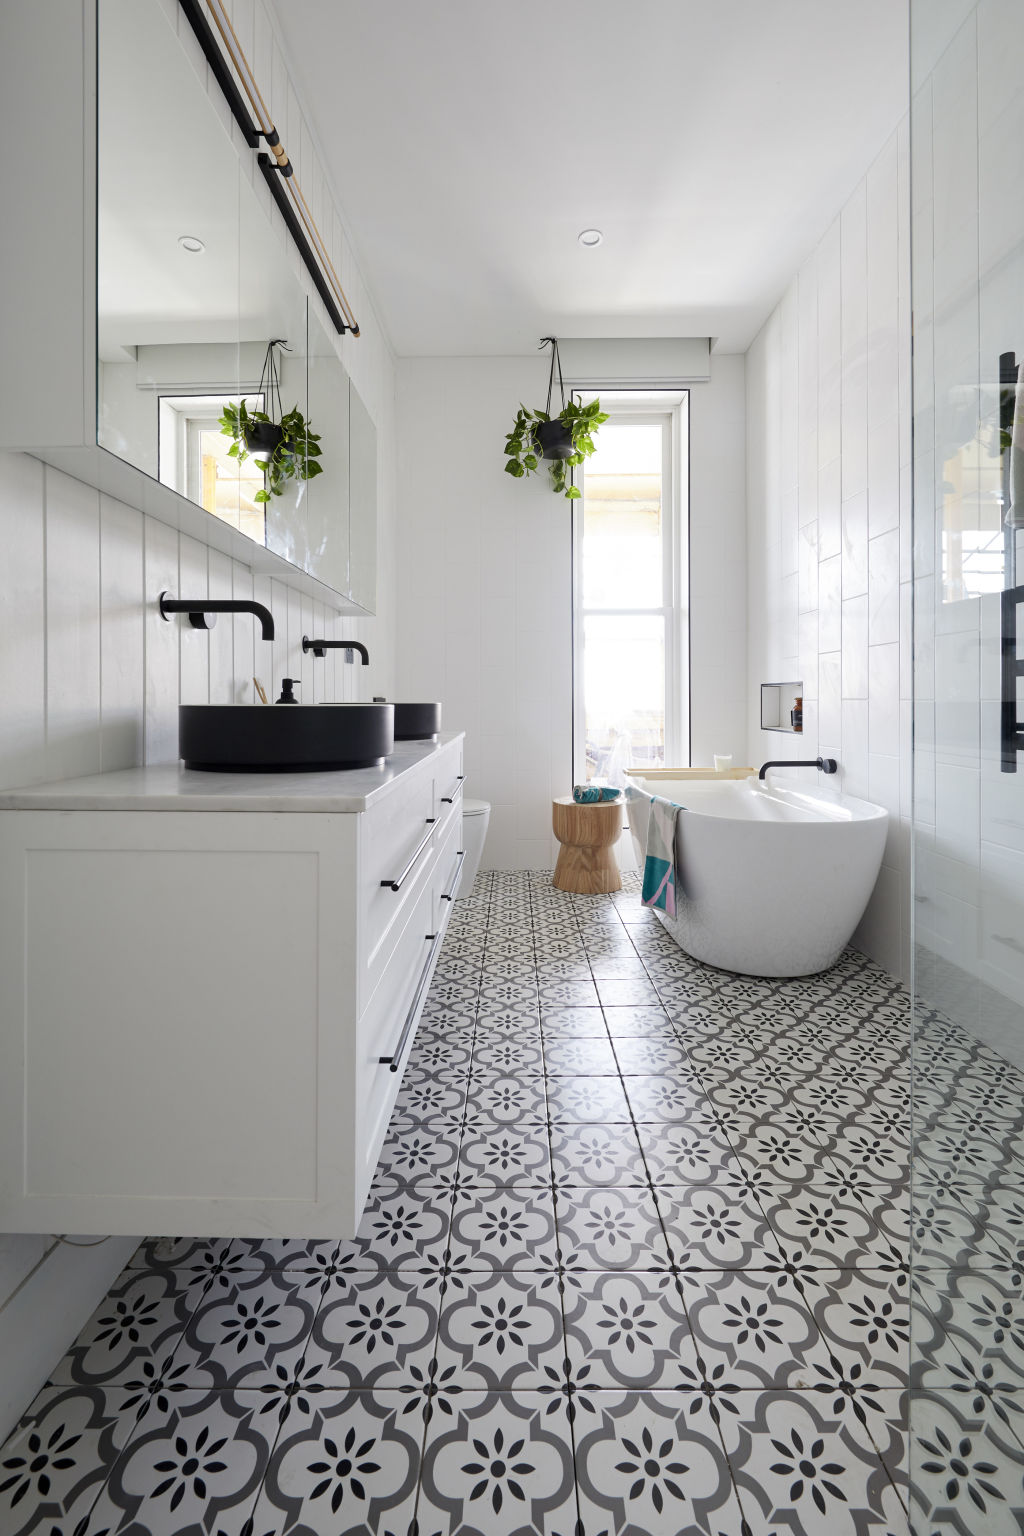 A fresh take on tapware 'would have elevated' Luke and Tess's bathroom. Photo: Channel Nine